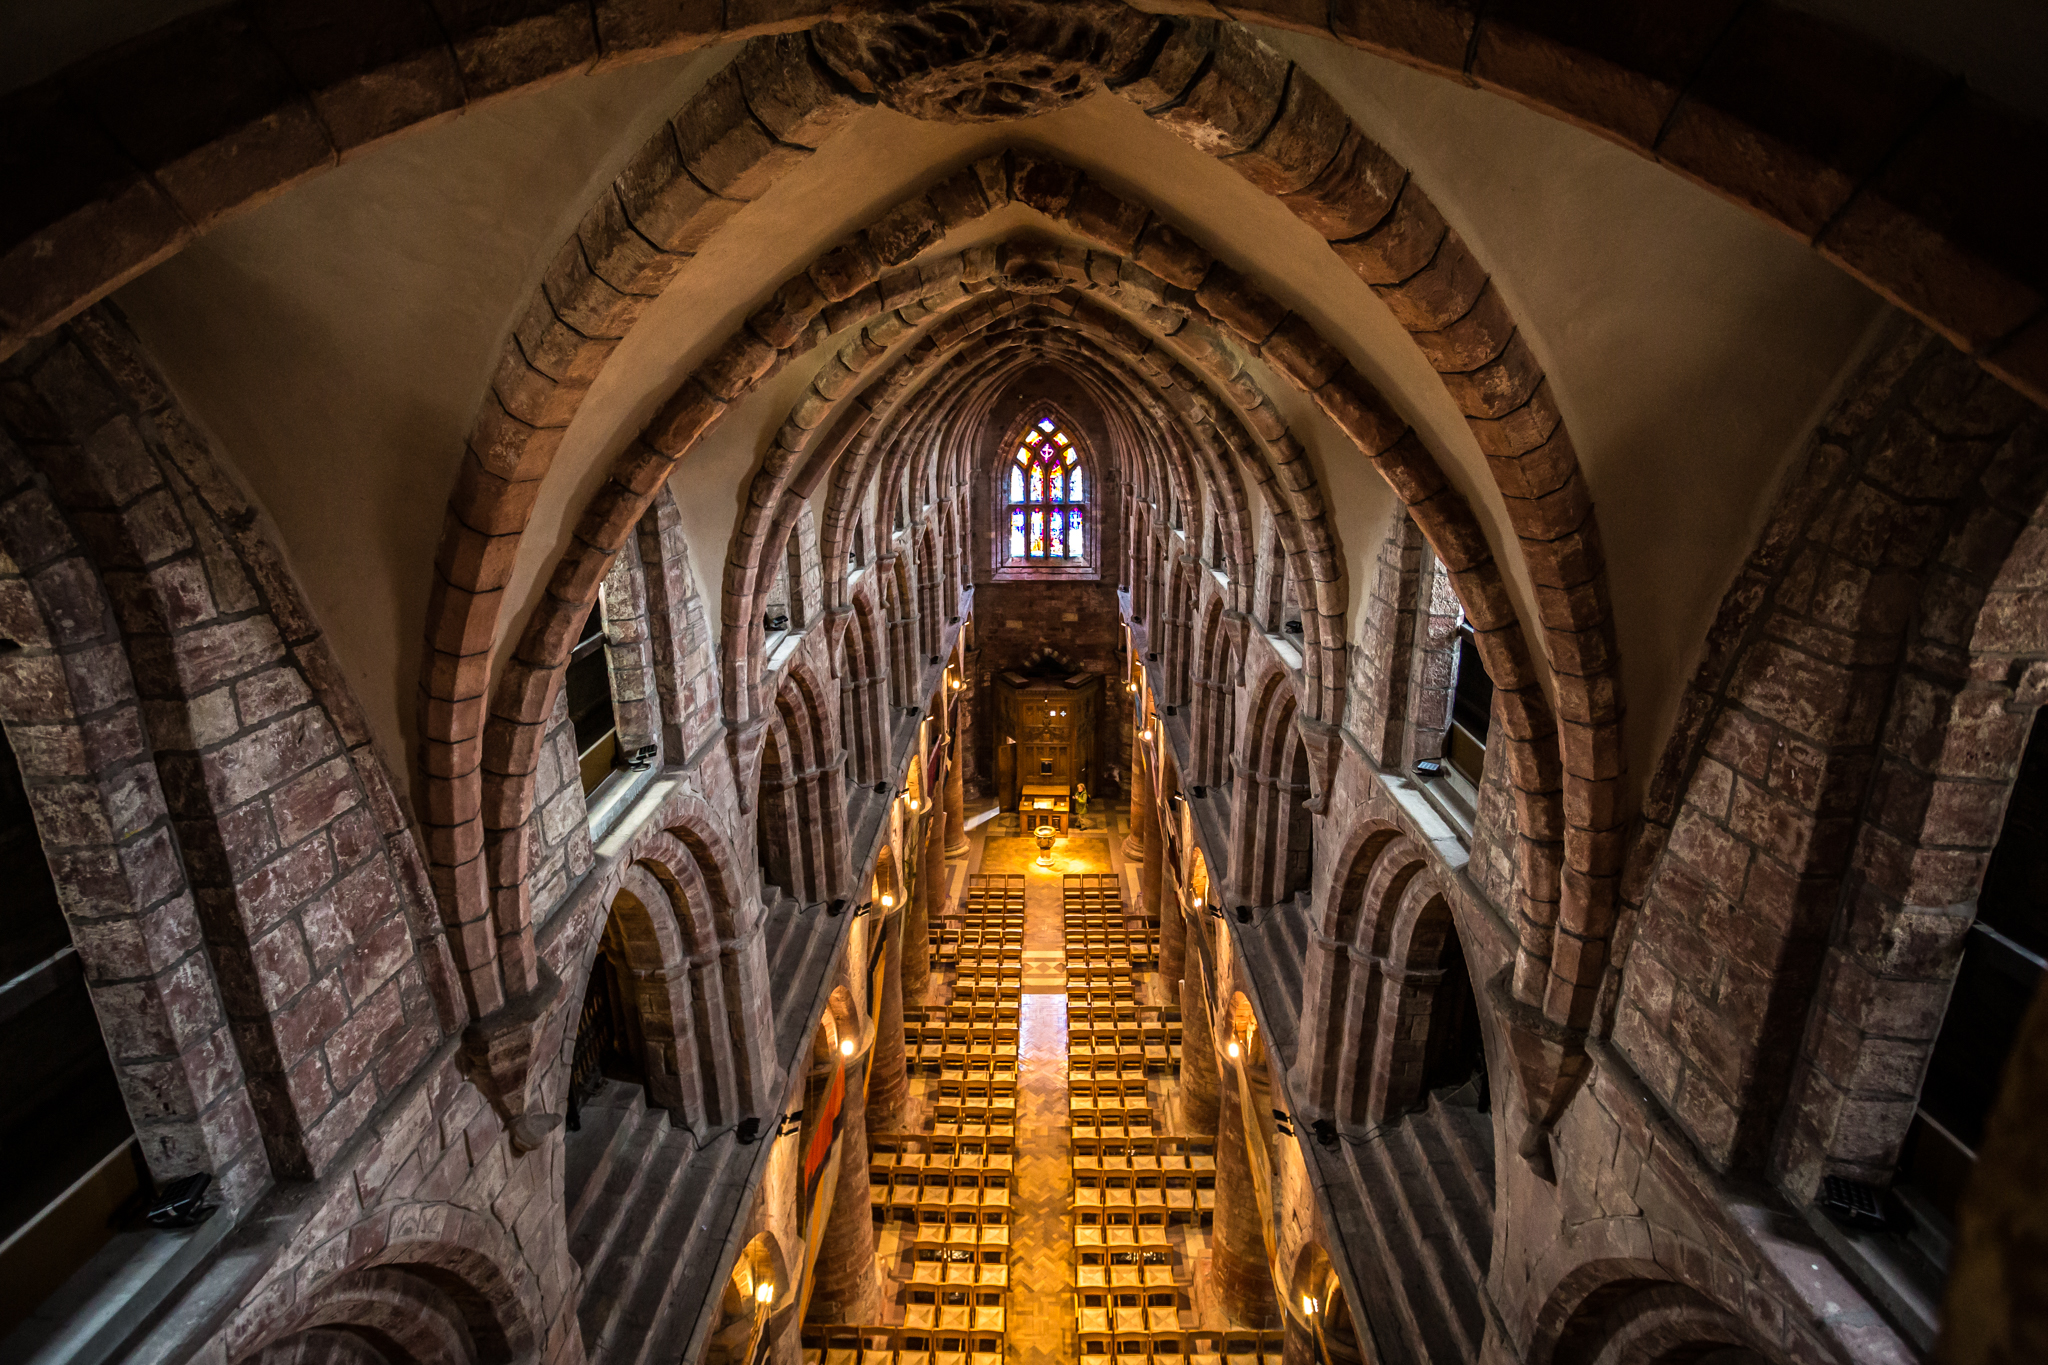 St Magnus Cathedral, Orkney - image by Dawn Underhill